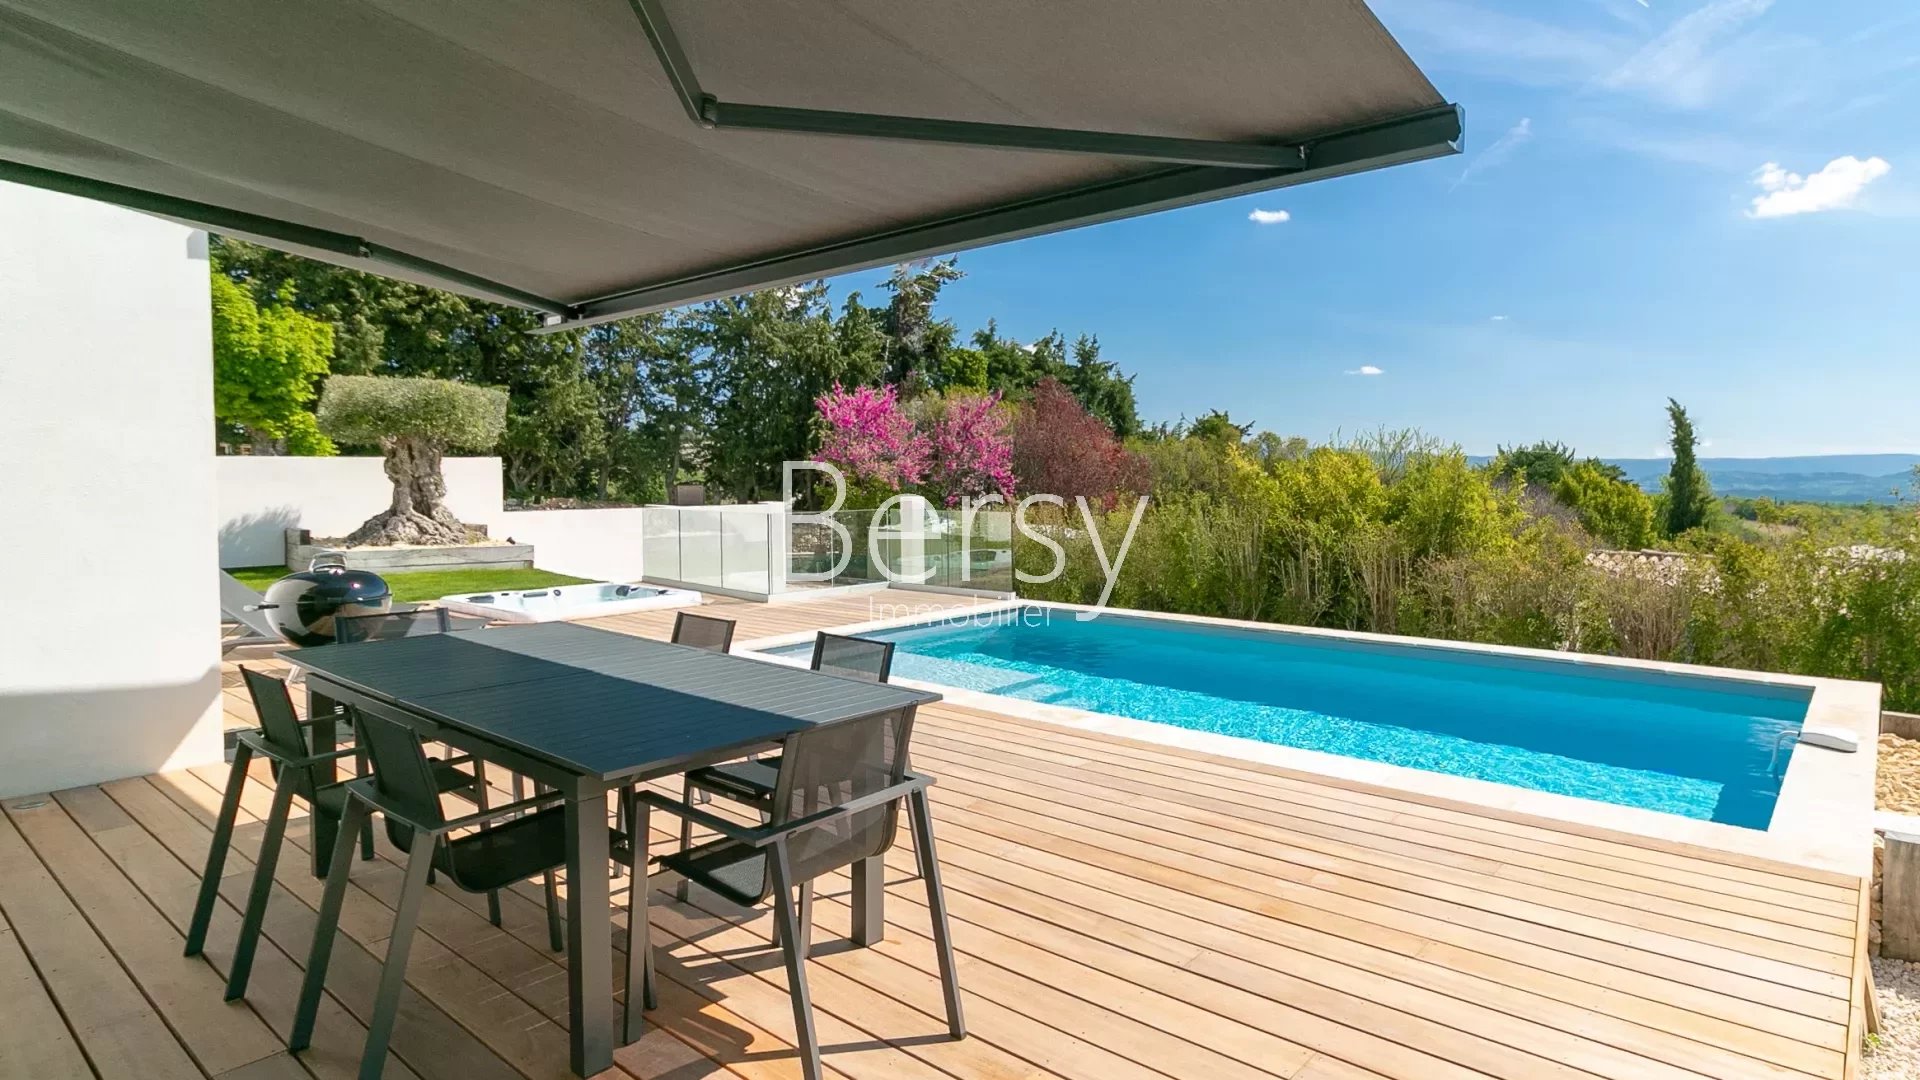 ★ CONTEMPORARY House with Pool & ★ BERSY LUXURY PROPERTIES® ★ At the foot of MONT VENTOUX ★